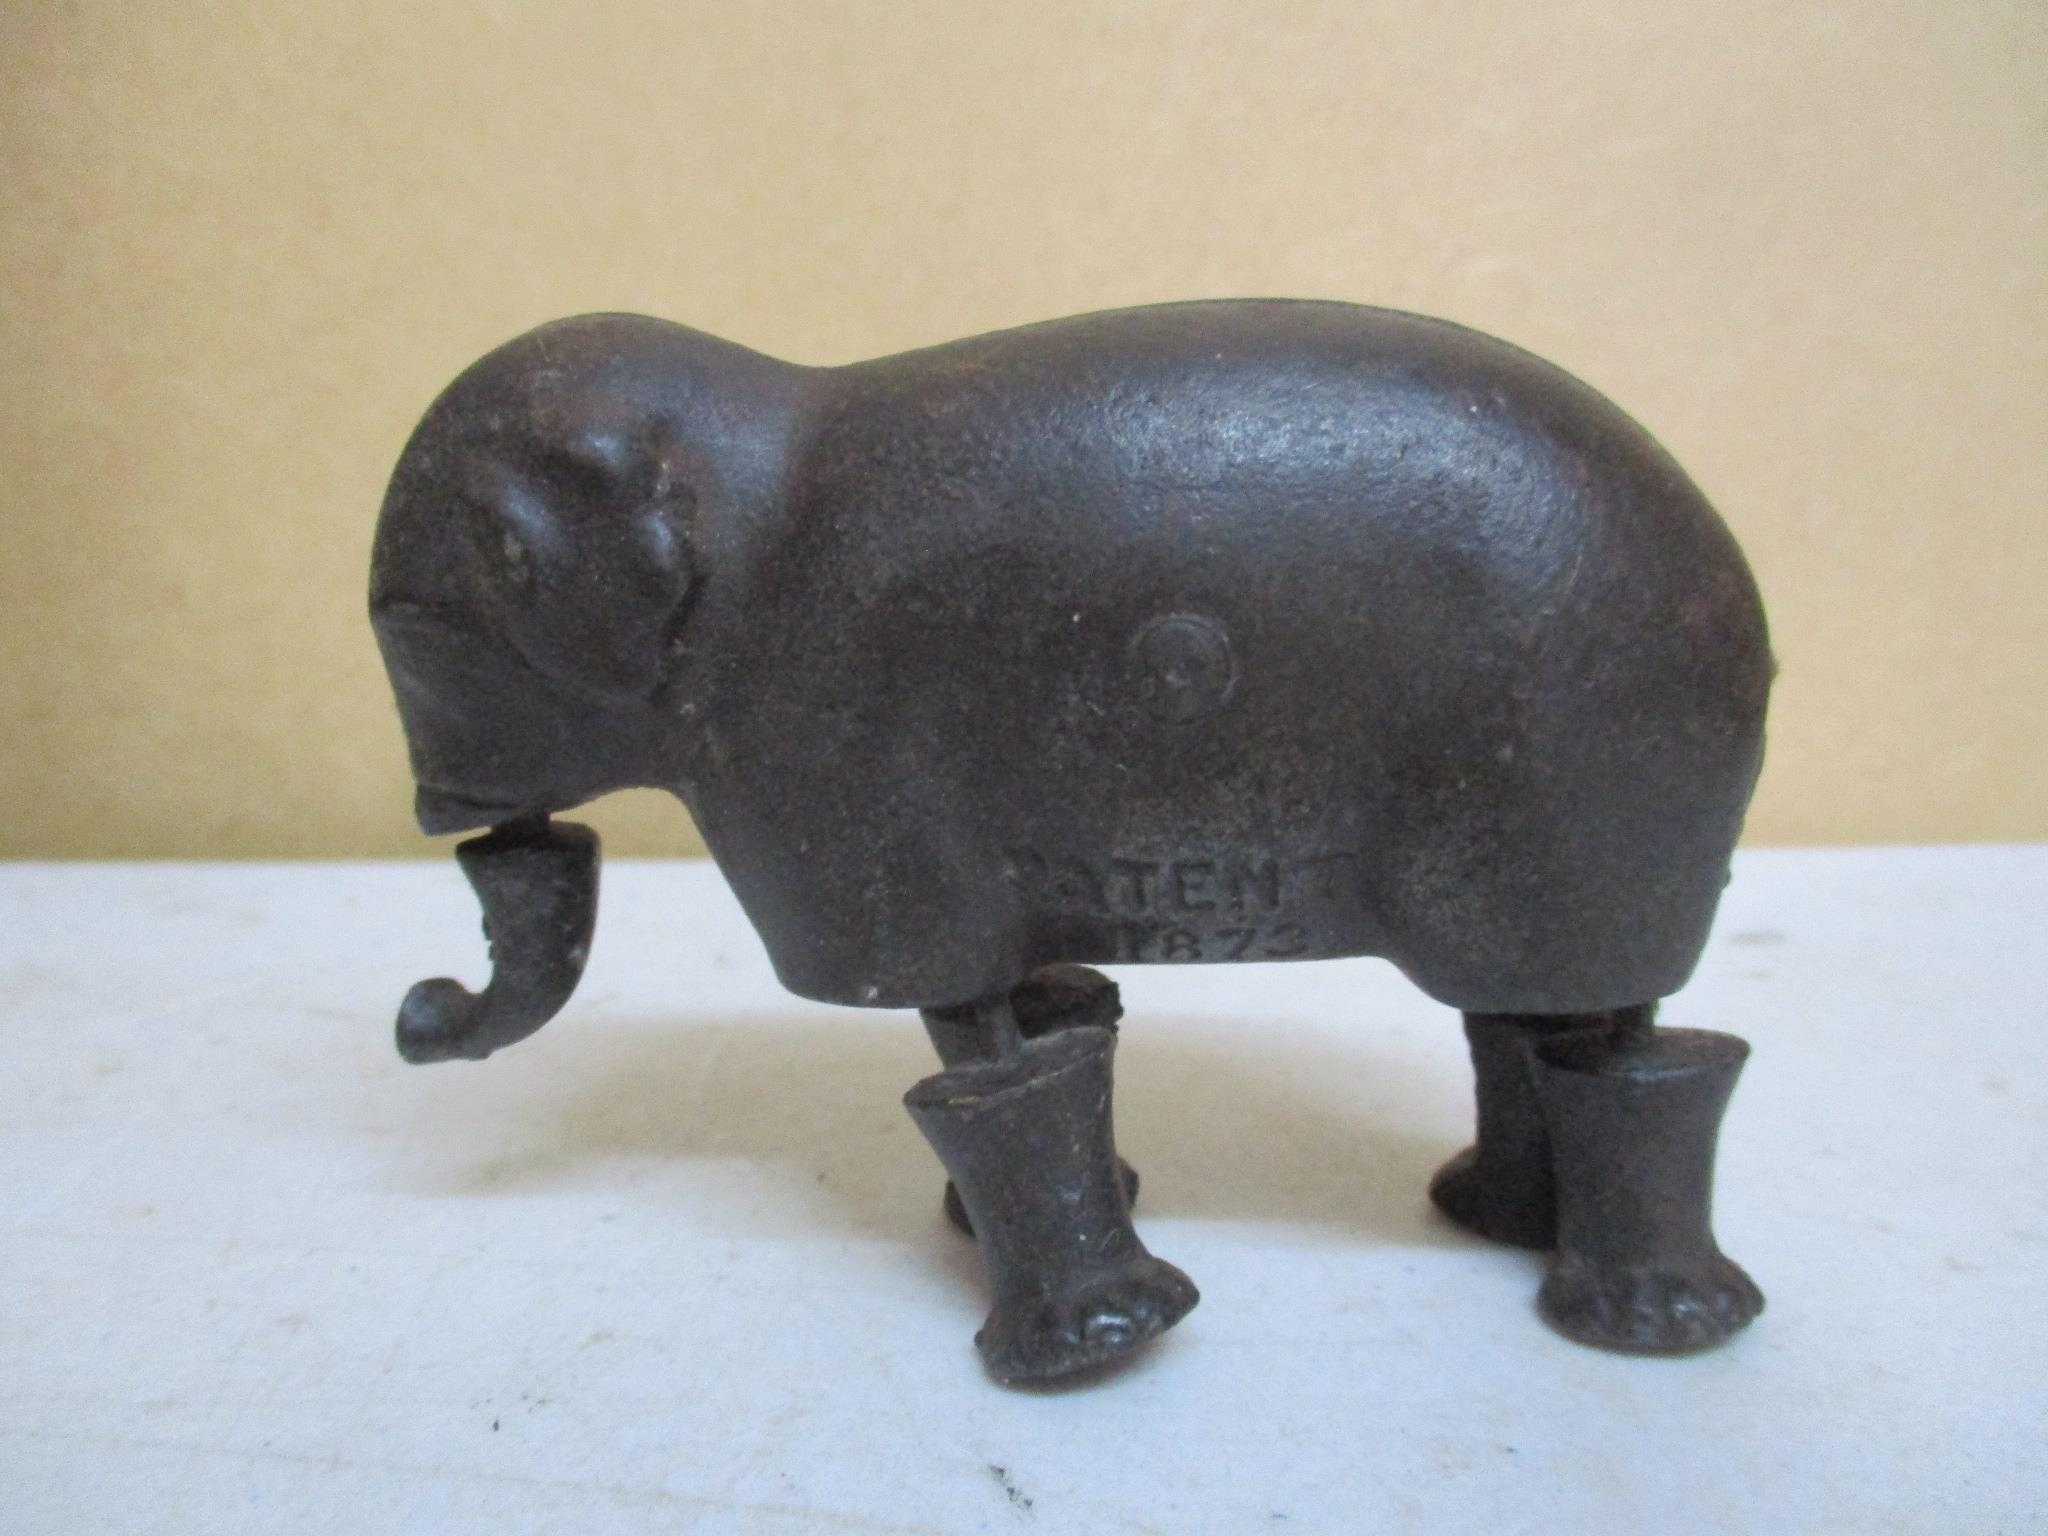 A Victorian IVE's cast iron ramp walking toy elephant, stamp marked patent 1873, made by the Ives